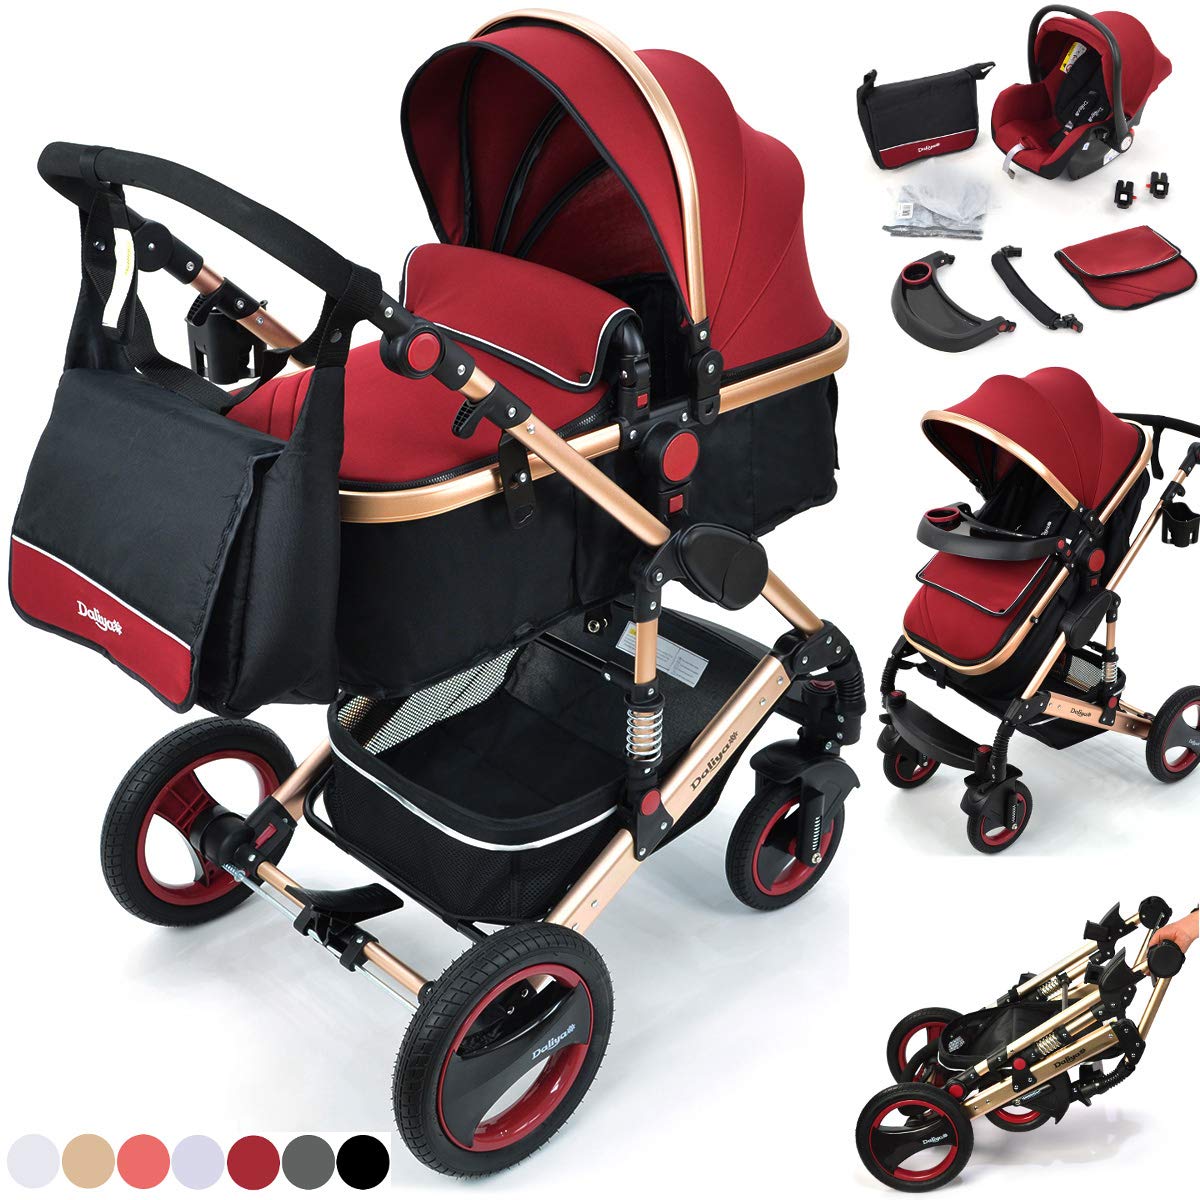 Daliya Bambimo 3-in-1 Pram, Giant 14-Piece Set with Baby Seat in Various Colours, Including Changing bag/rain cover/table.